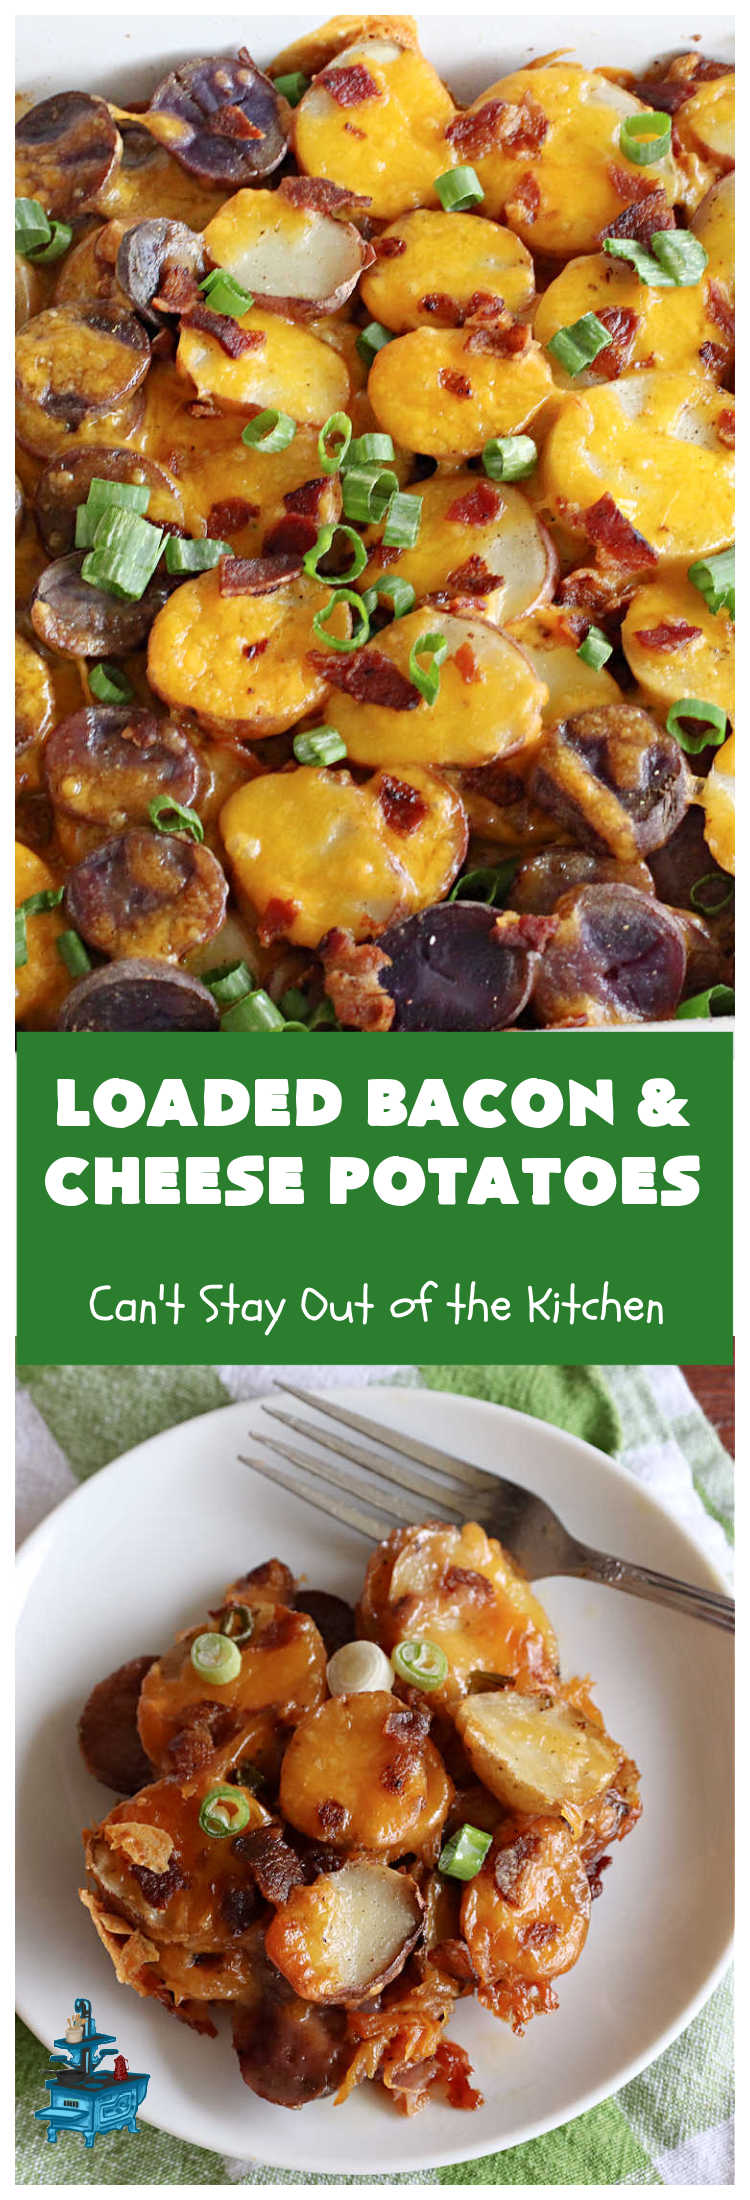 Loaded Bacon and Cheese Potatoes | These fantastic #potatoes are dripping with #CheddarCheese & loads of #bacon. Every bite will knock your socks off. This is a great #casserole for family, company or #holiday dinners. Everyone will want seconds. #GlutenFree #PotatoMedley #LoadedBaconAndCheesePotatoes